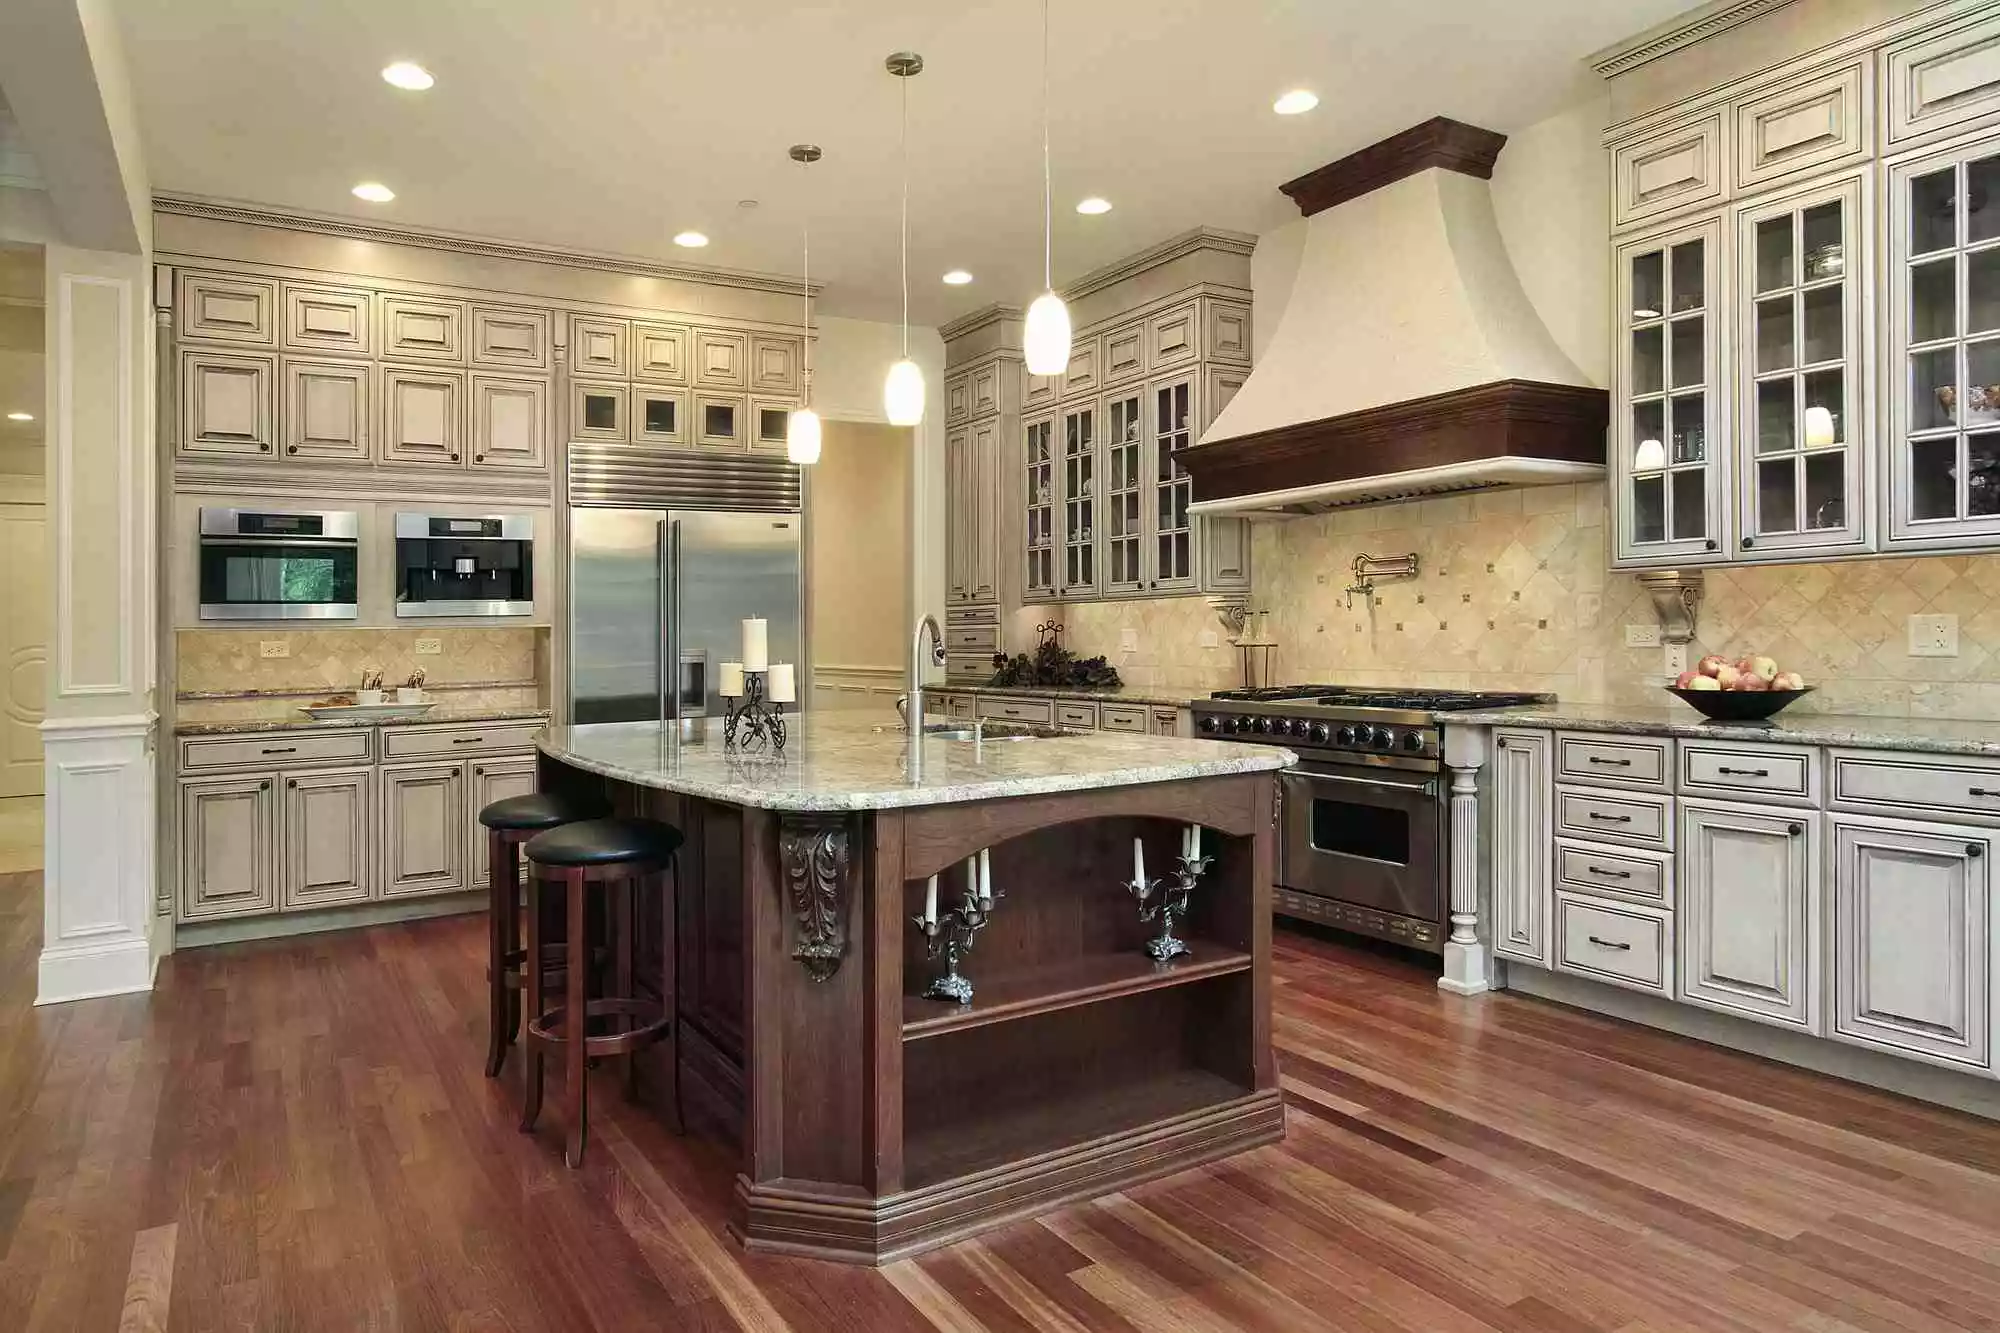 Kitchen remodeling and contracting service near Fayetteville NC